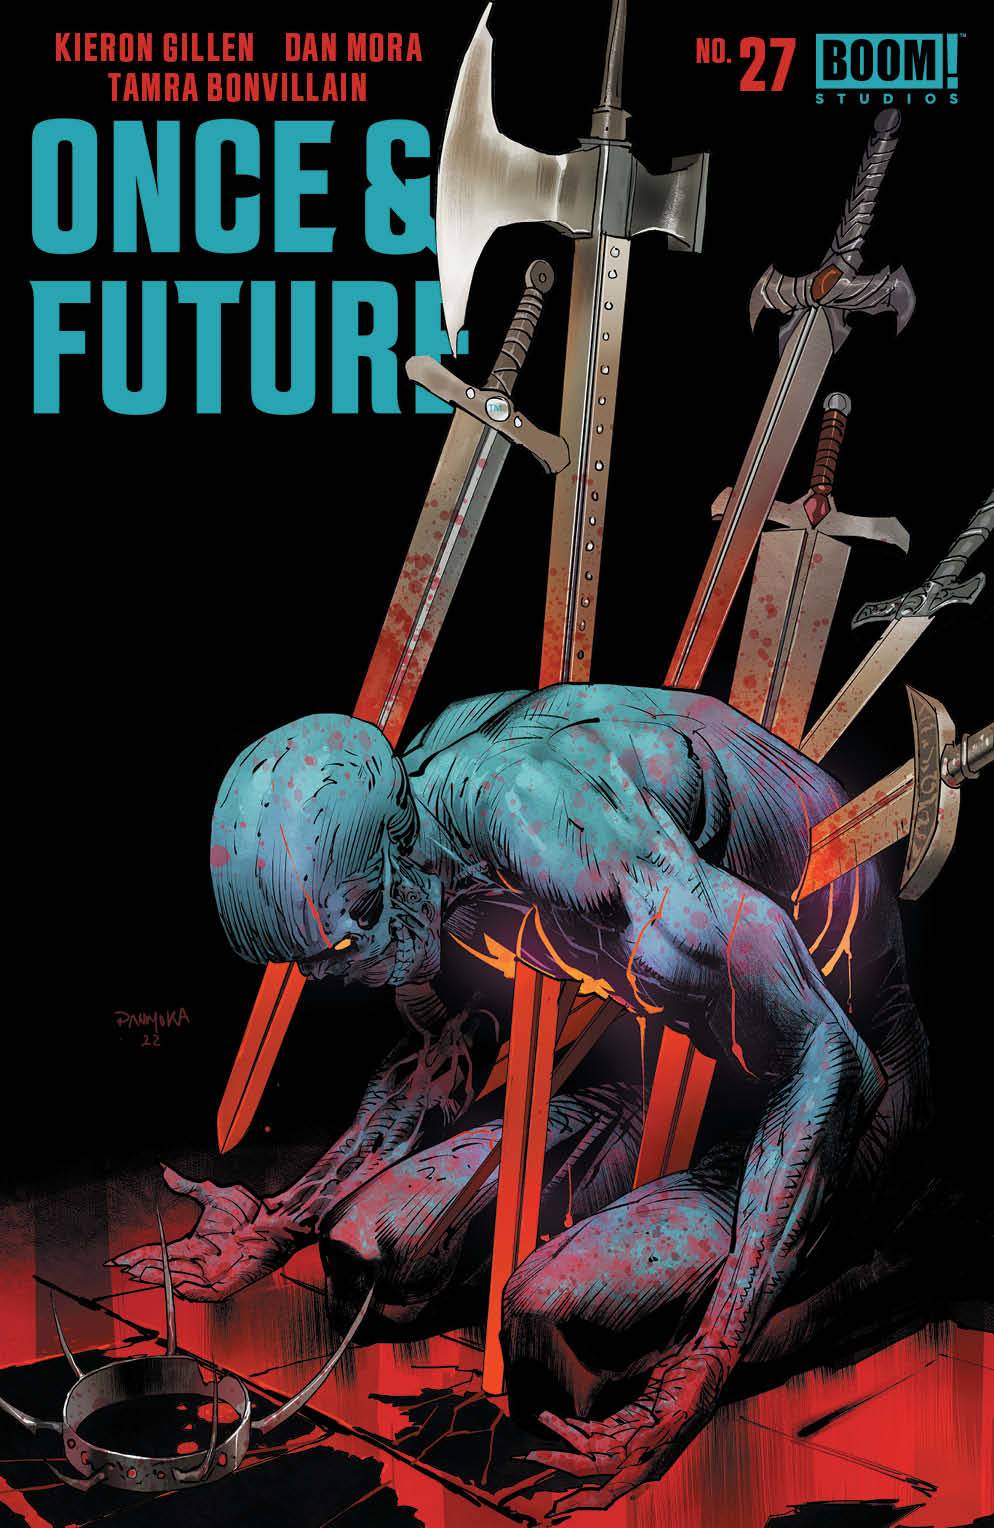 Once & Future #27 (Cover A - Mora)